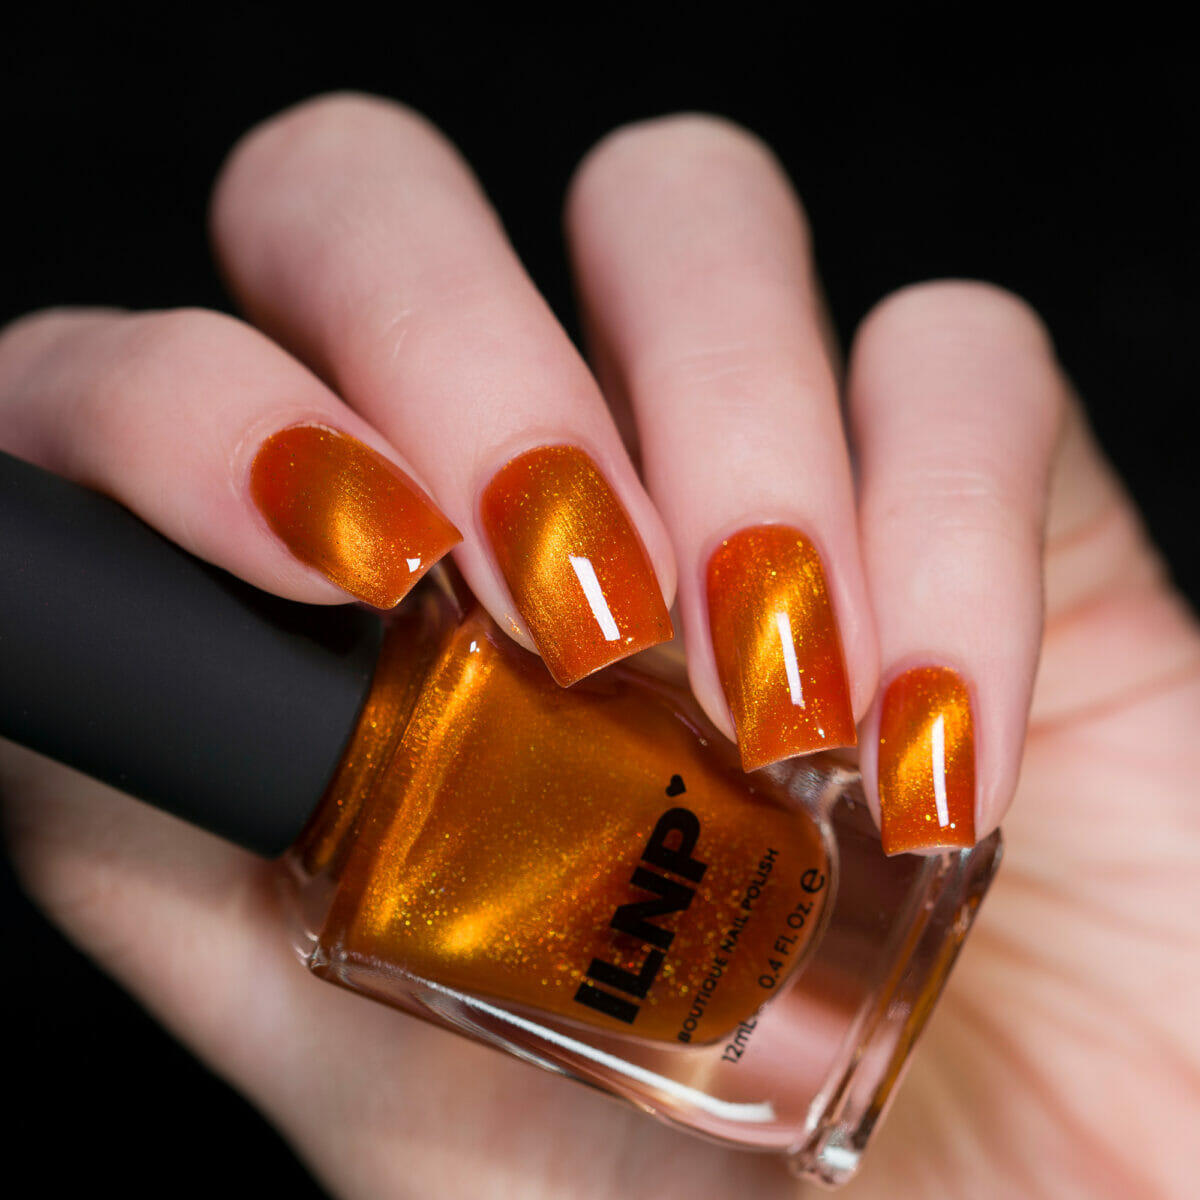 Amber - Warm Amber Magnetic Nail Polish by ILNP